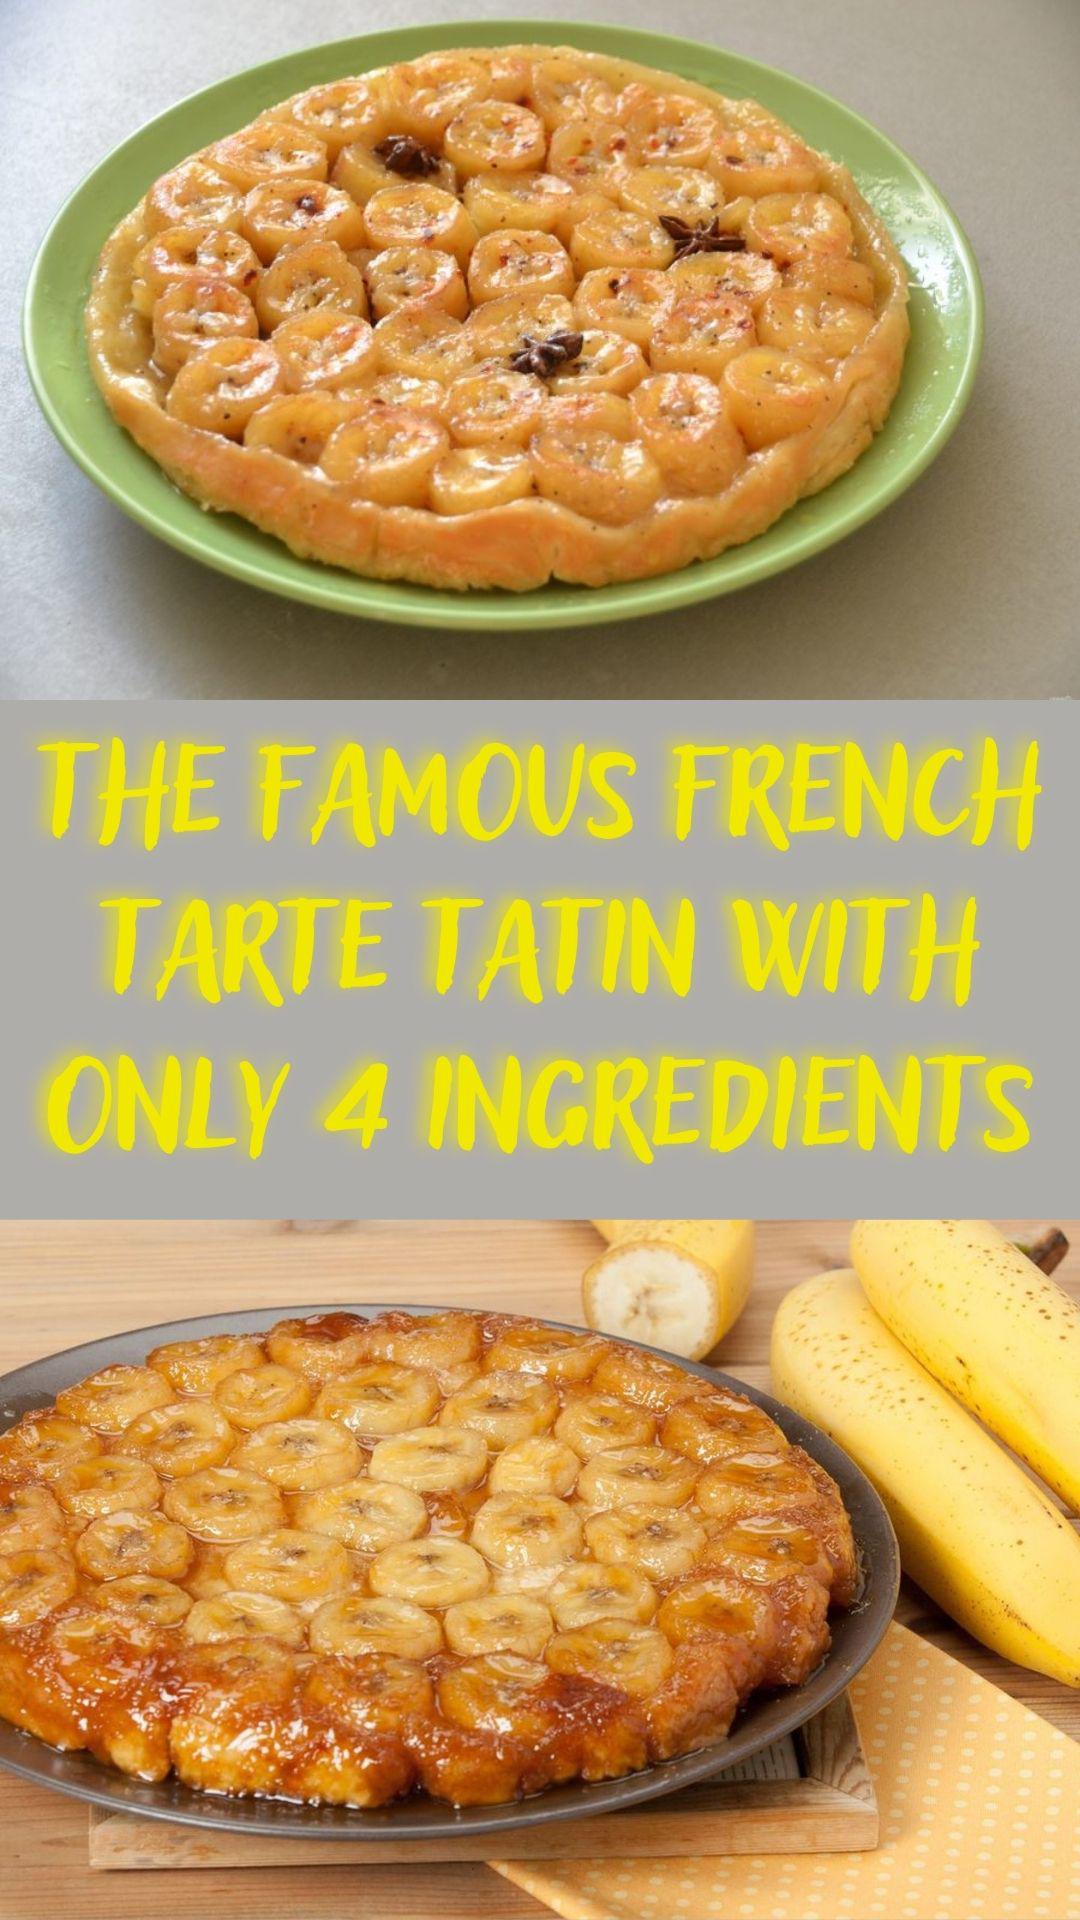 The Famous French Tarte Tatin with only 4 ingredients